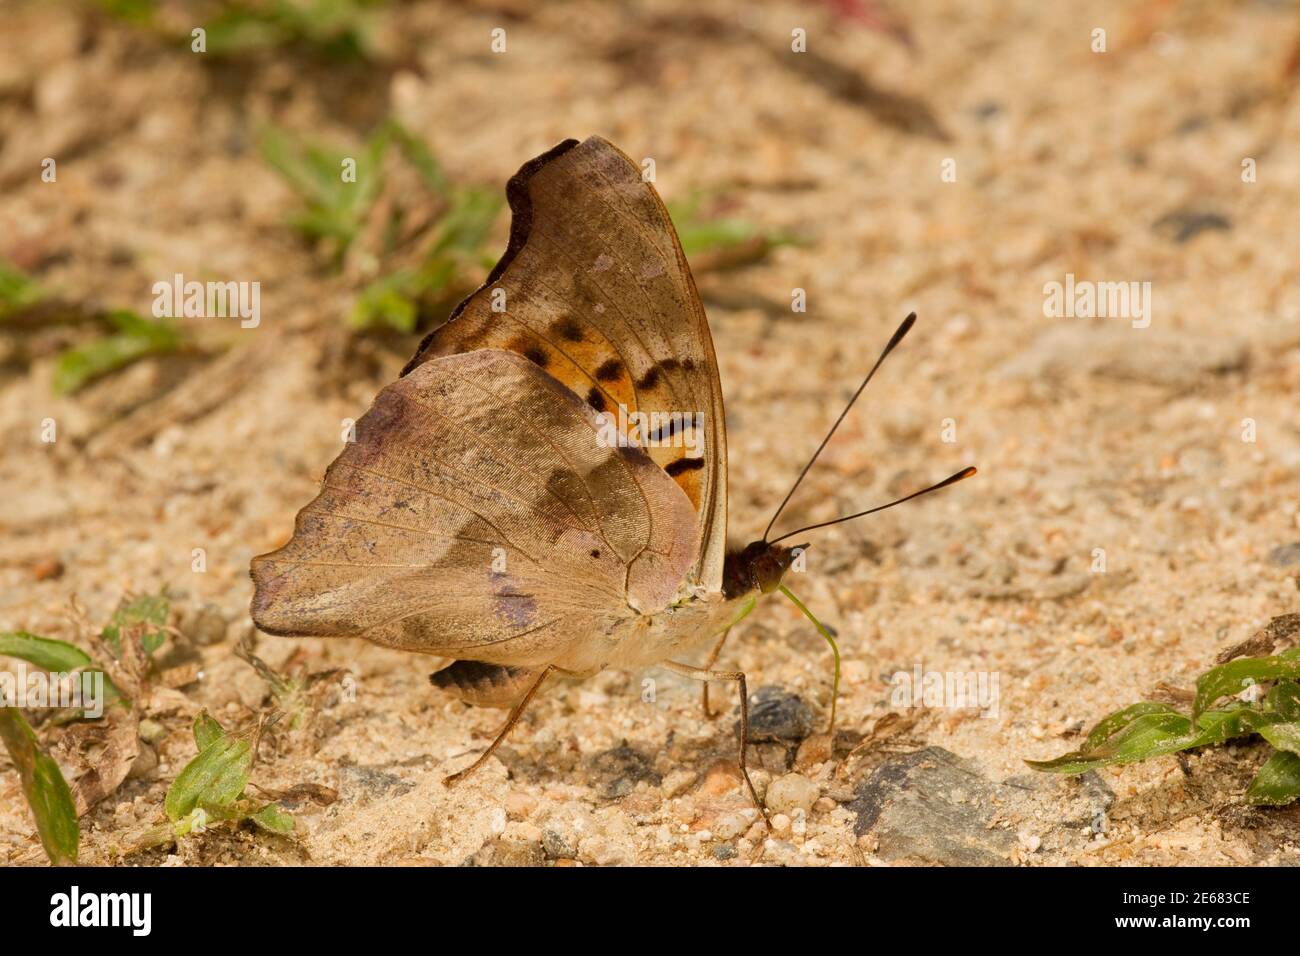 Brush-footed Butterfly, Doxocopa cyane, Nymphalidae. Ventral view. Stock Photo